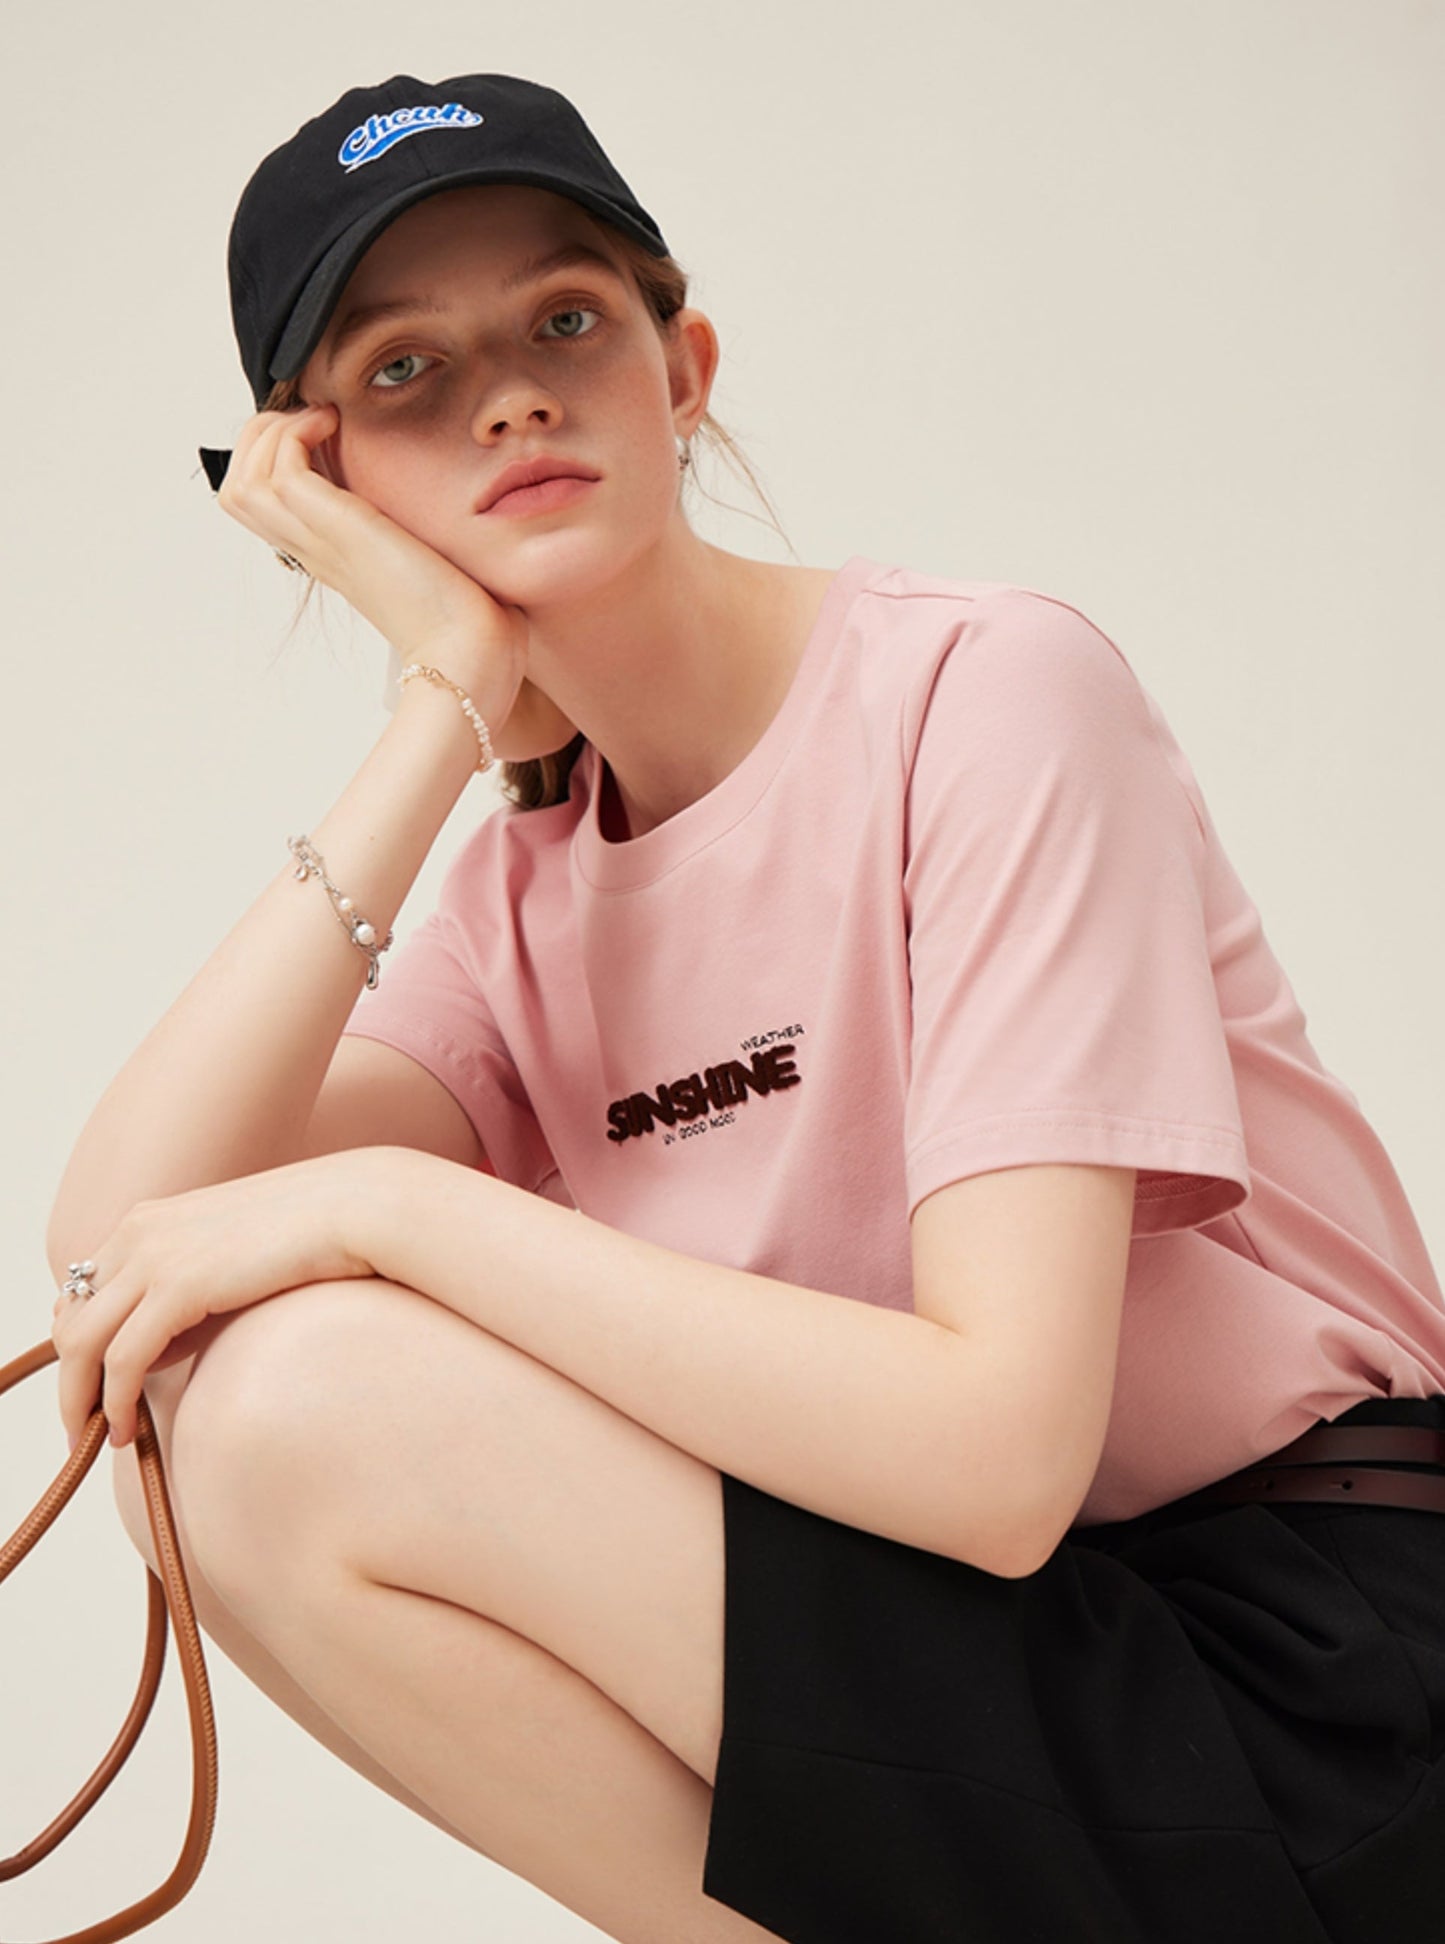 Crew Neck Short Sleeve Embroidered Tee T-Shirt